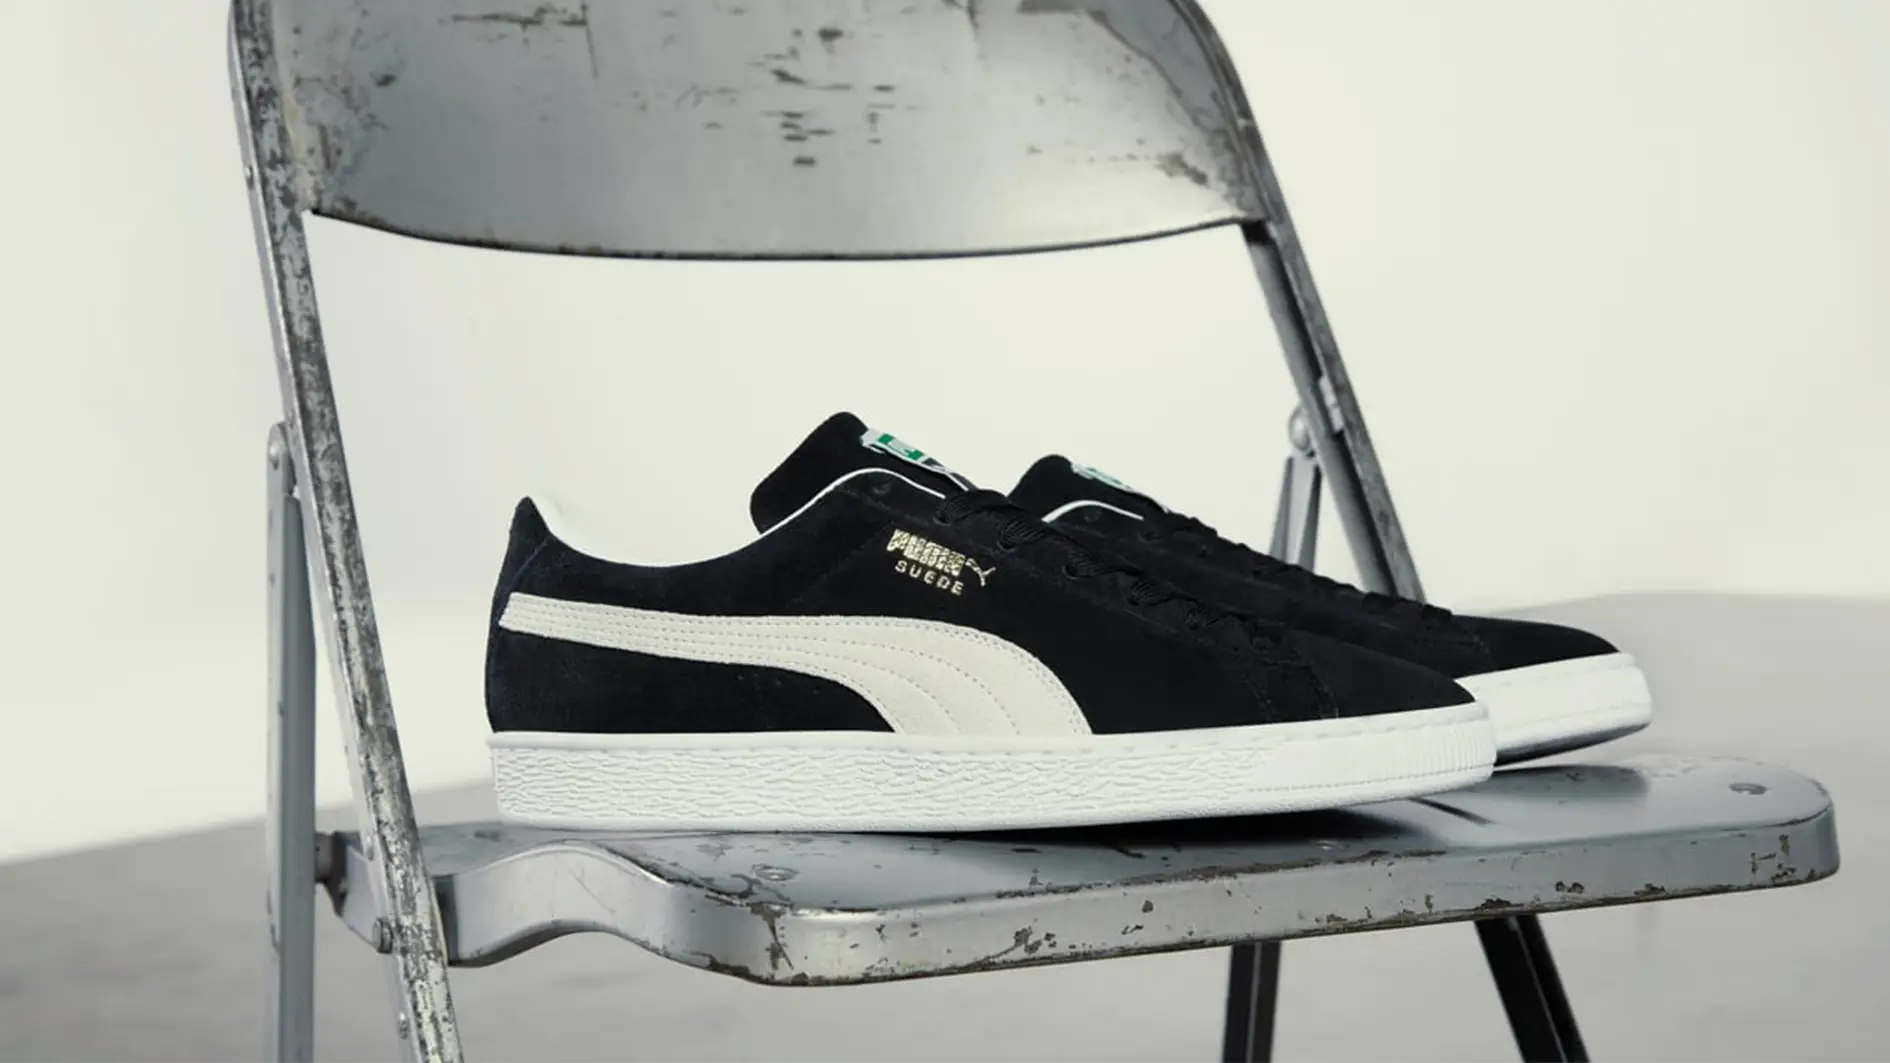 Puma Suede Size Guide: Does the Puma Suede Fit True to Size?